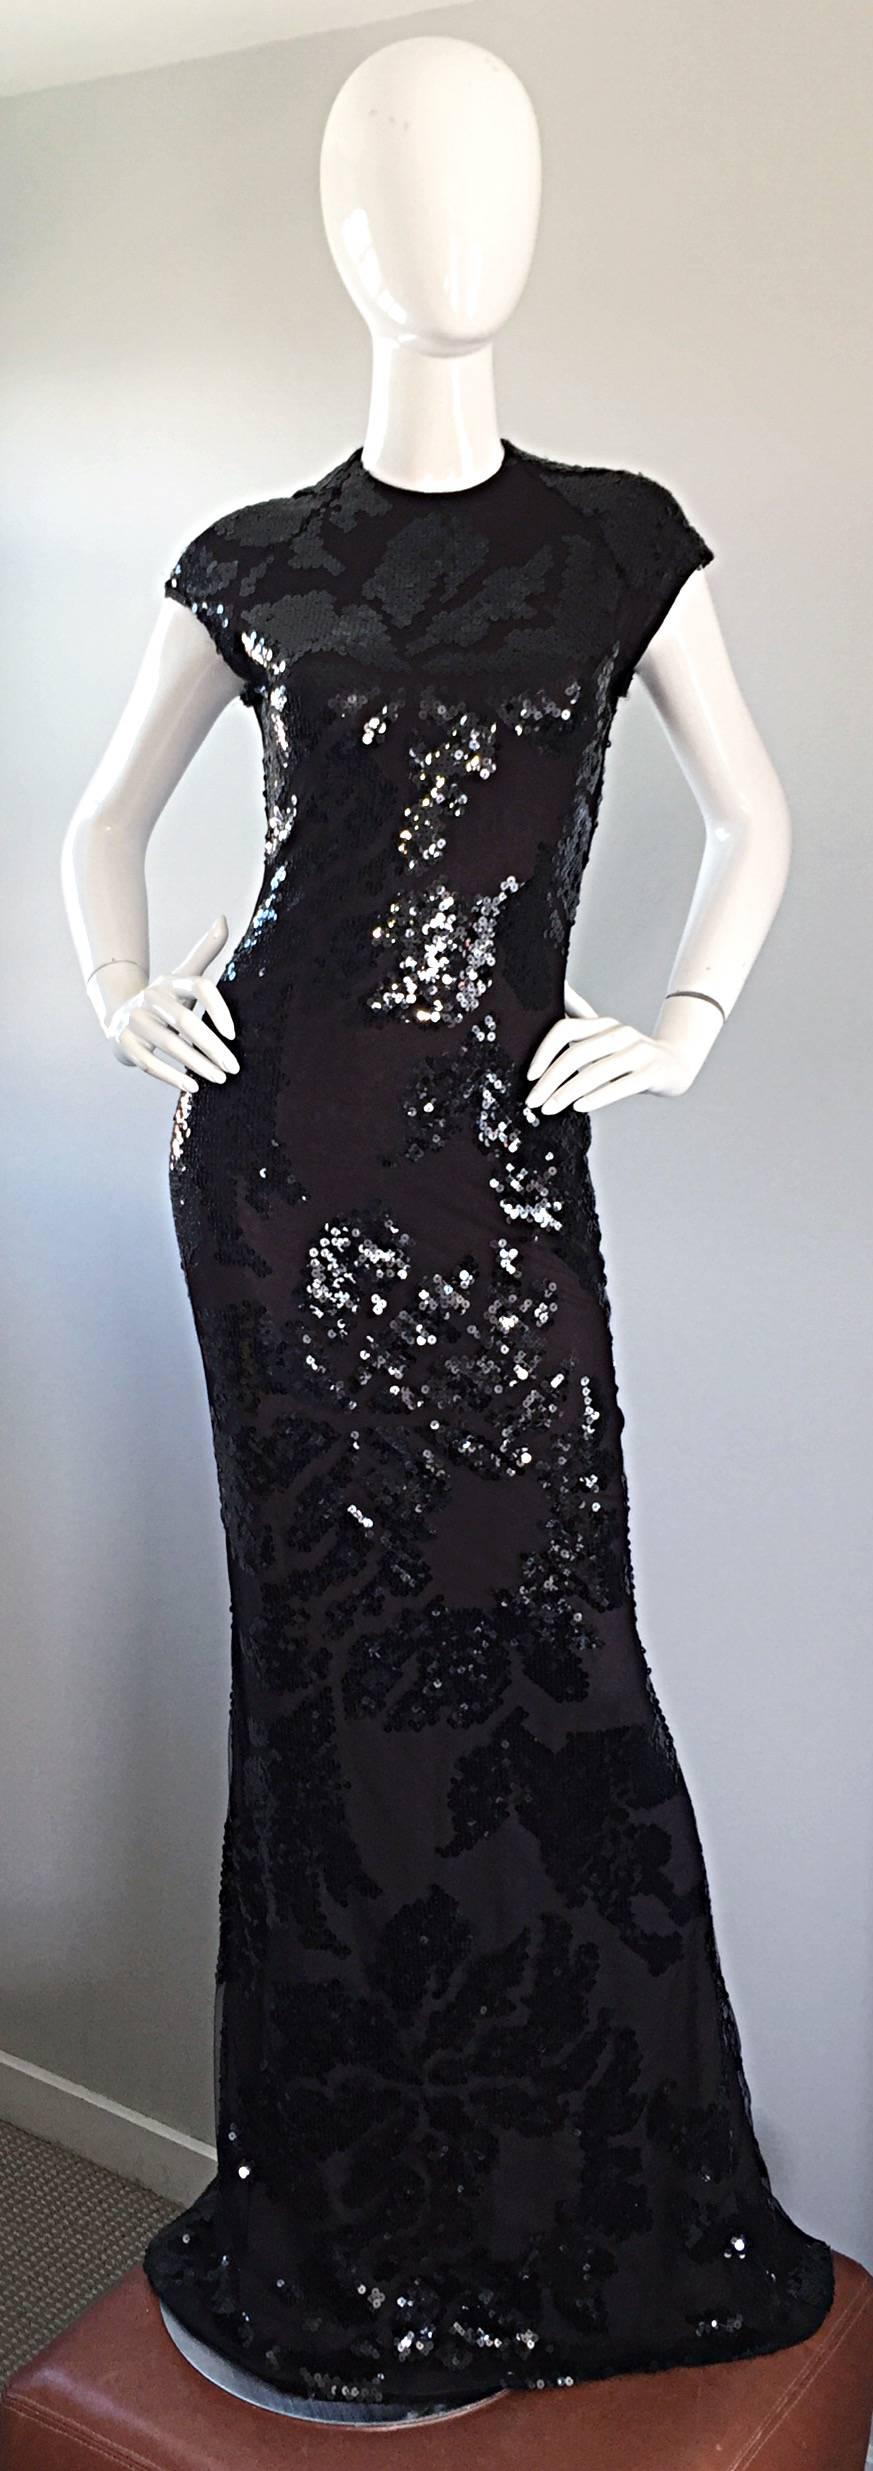 Insanely beautiful, rare, AND important brand new with original $12,000 price tag (would equal well over $20,000 today), this vintage HALSTON Couture gown is truly breathtaking! Black silk with a chic black silk lace mesh overlay. Encrusted with